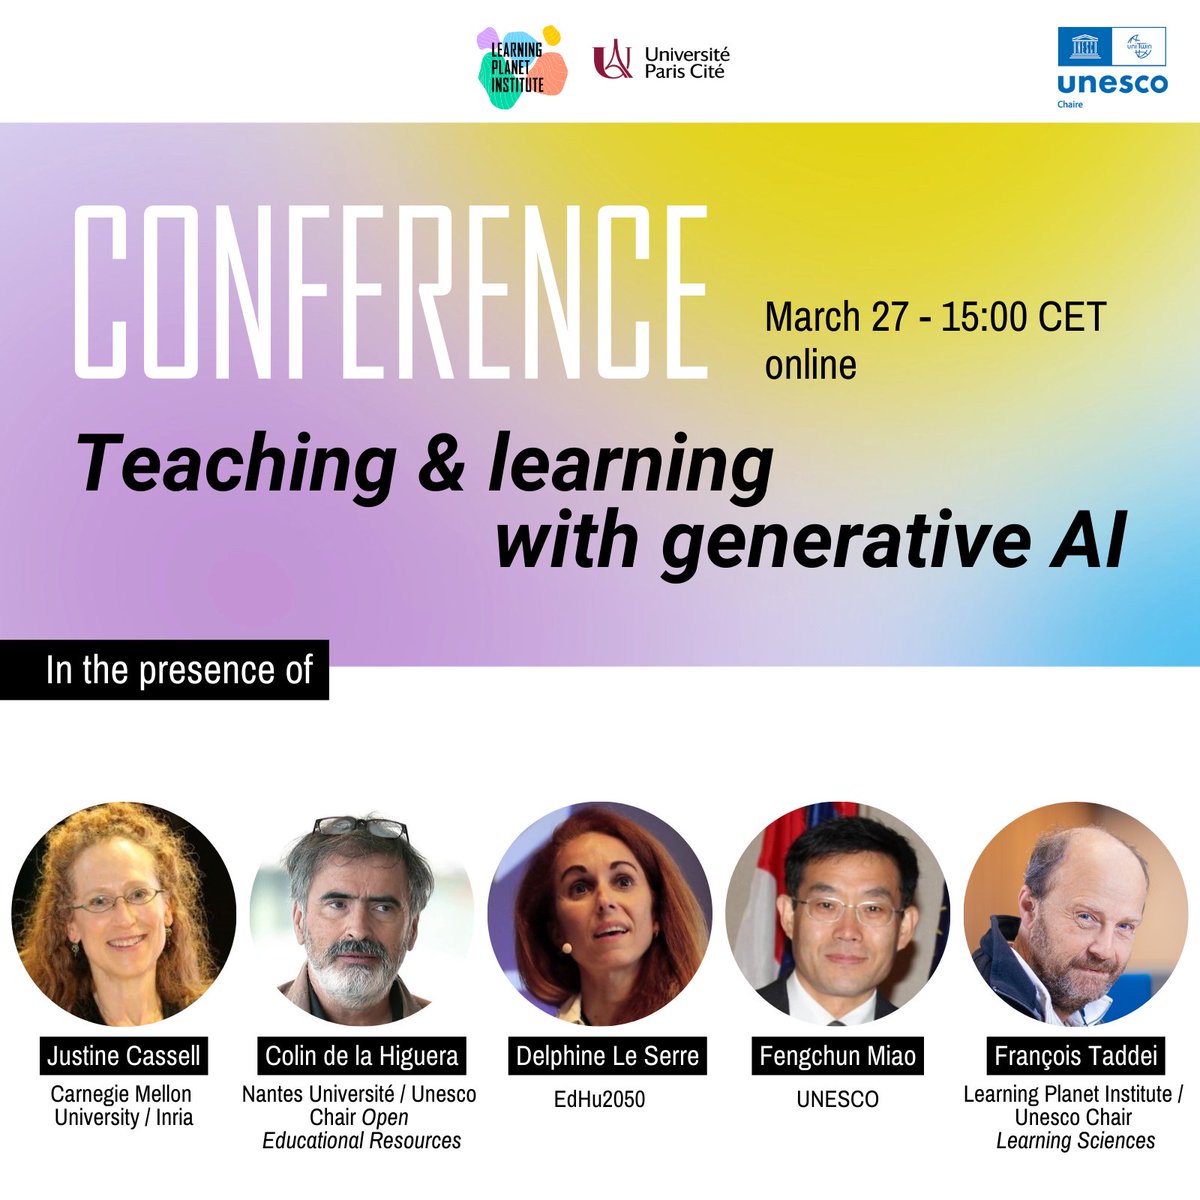 #JOIN us for an online session exploring the disruptive potential of #generativeAI in teaching and #learning! 📆 Wednesday March 27 - 15:00CET learningplanetinstitute.org/nos-evenements… 🙌 part of the #LearningSciences #Unesco Chair @FrancoisTaddei @DleserreFrench @univ_paris_cite @Chaire_RELIA